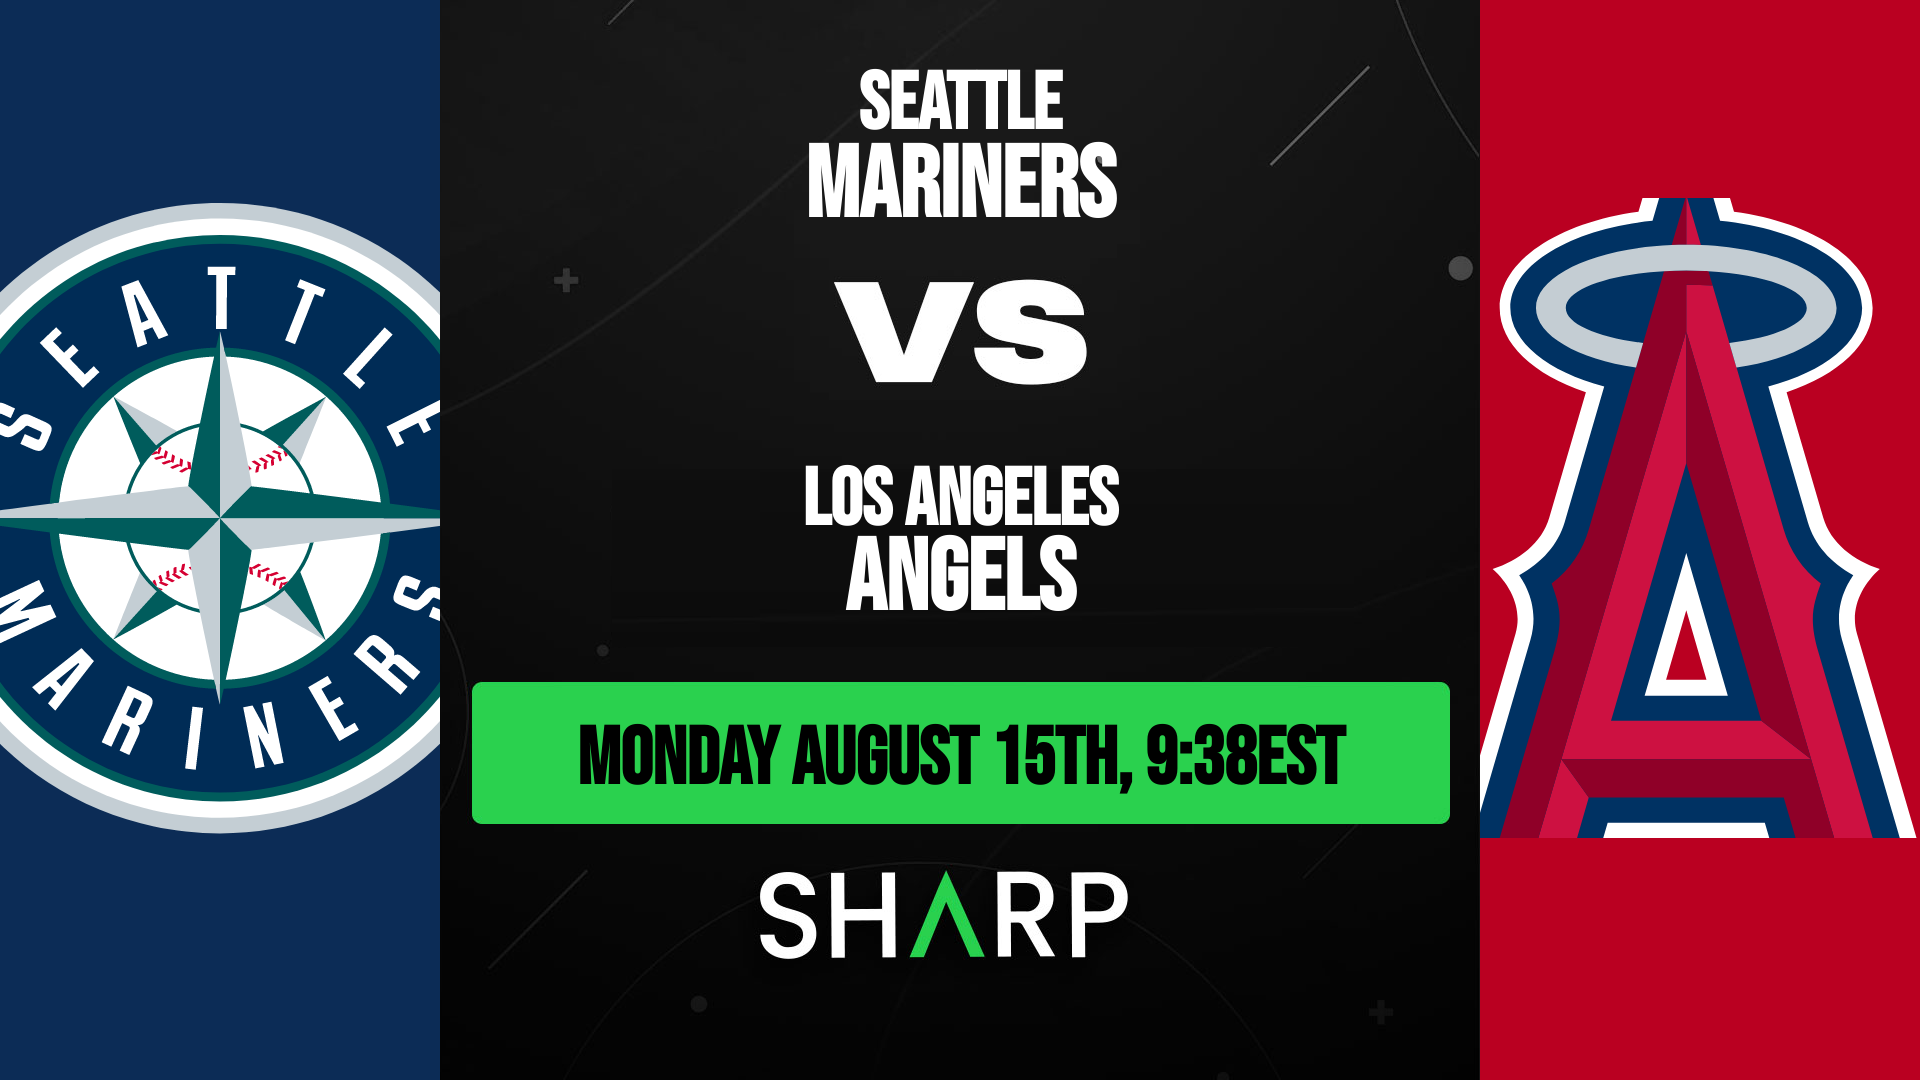 Seattle Mariners @ Los Angeles Angels Matchup Preview - August 15th, 2022